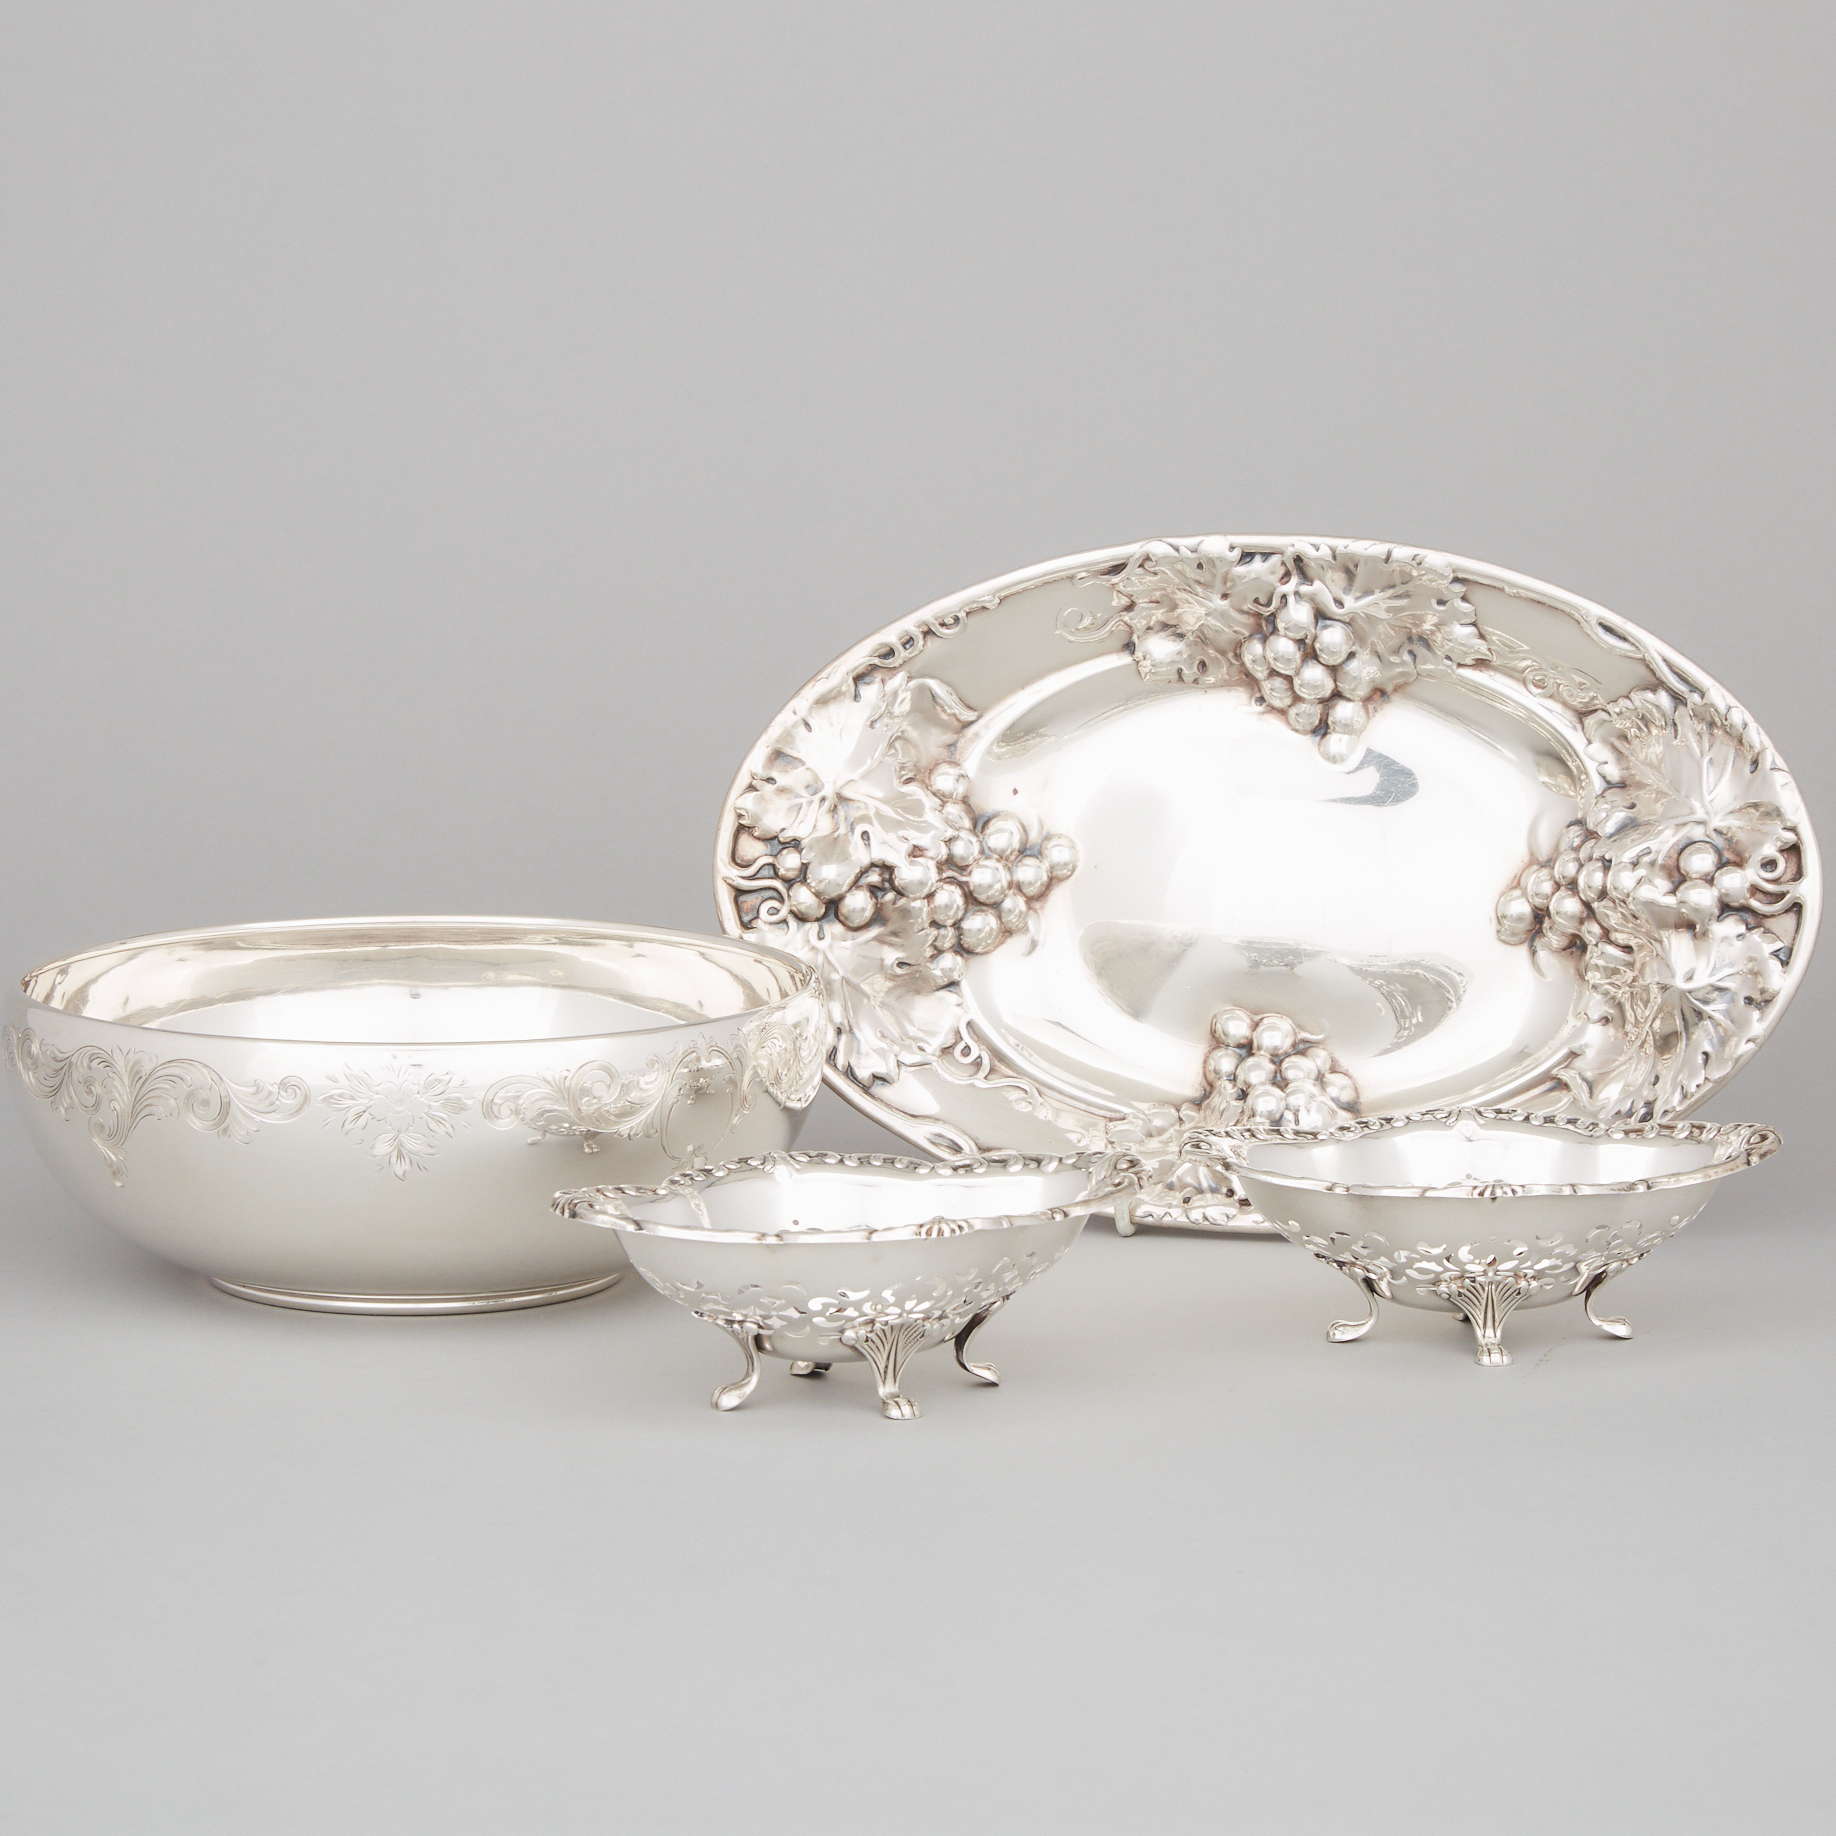 Canadian Silver Oval Dish, Circular Bowl and Pair of Pierced Candy Dishes, Henry Birks & Sons, Montreal, Que., 1938/49